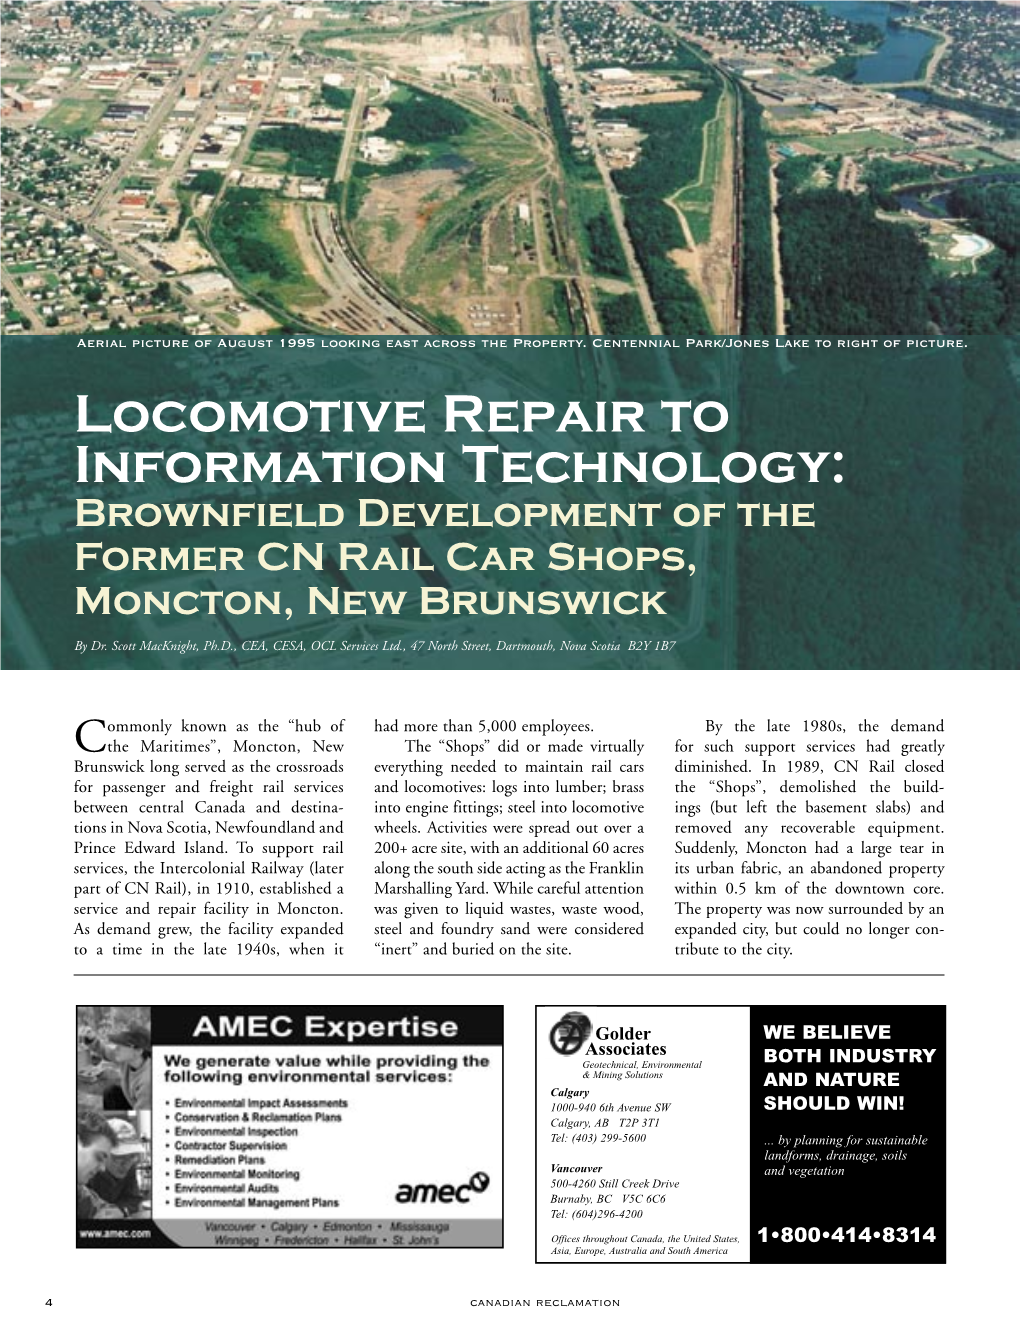 Locomotive Repair to Information Technology: Brownfield Development of the Former CN Rail Car Shops, Moncton, New Brunswick